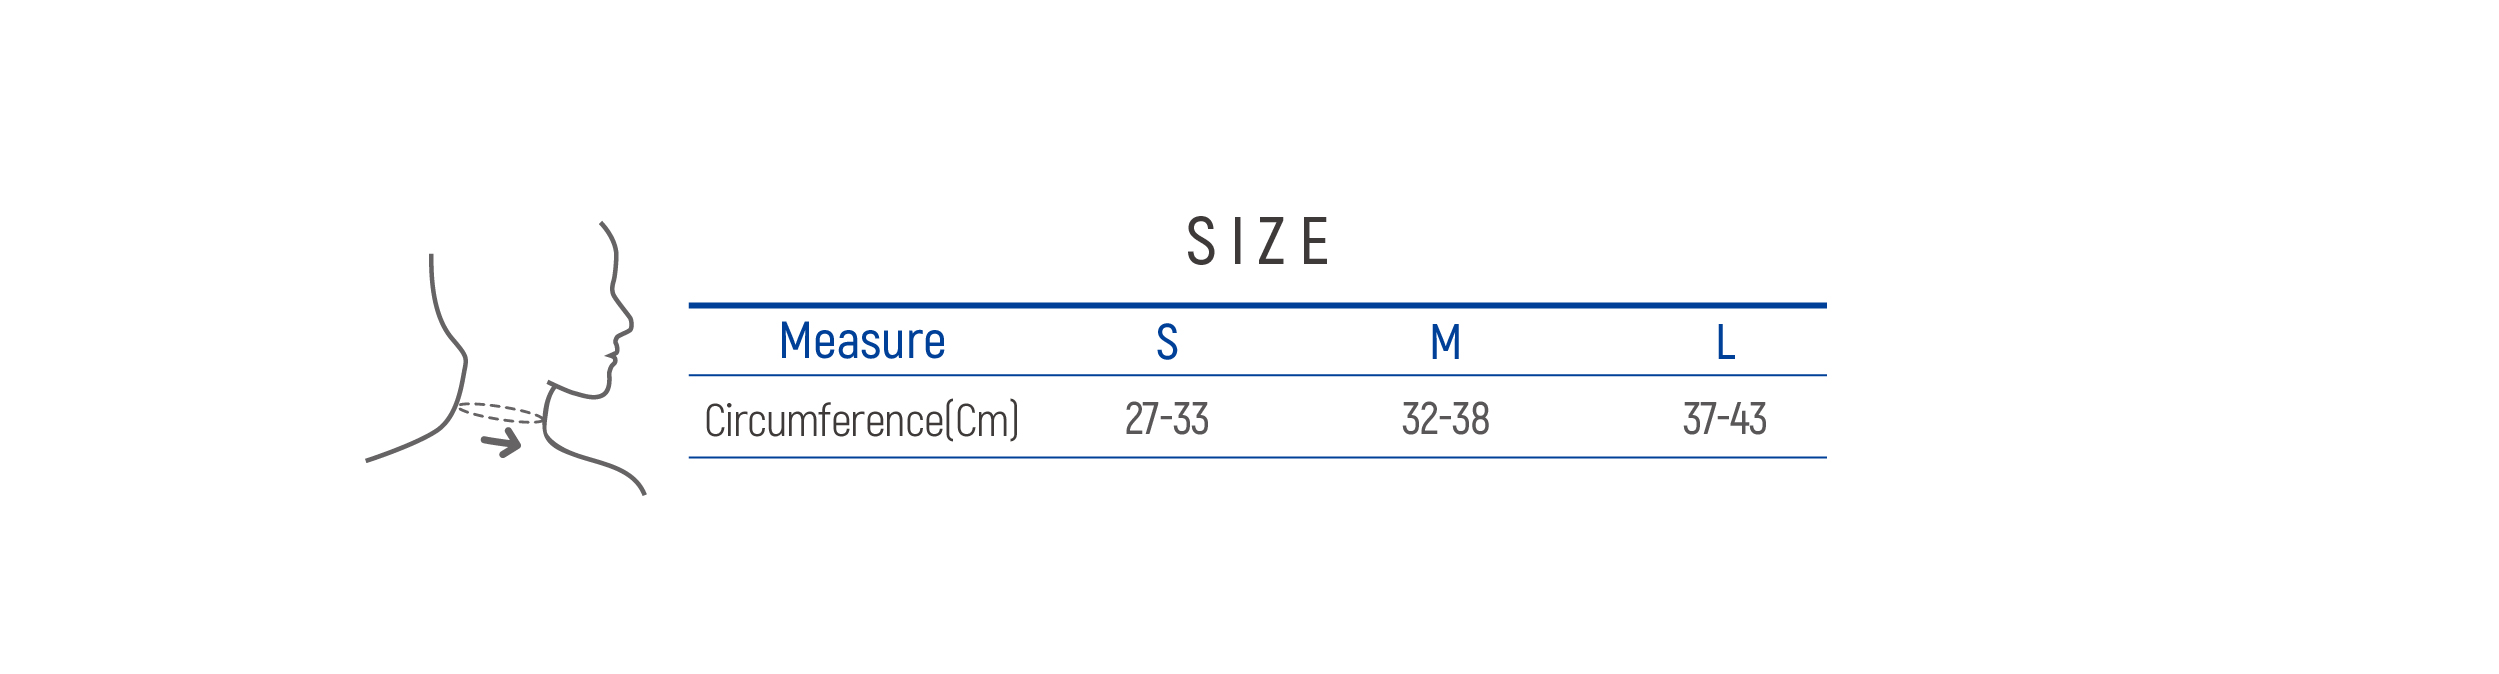 DR-122-2 Size table image